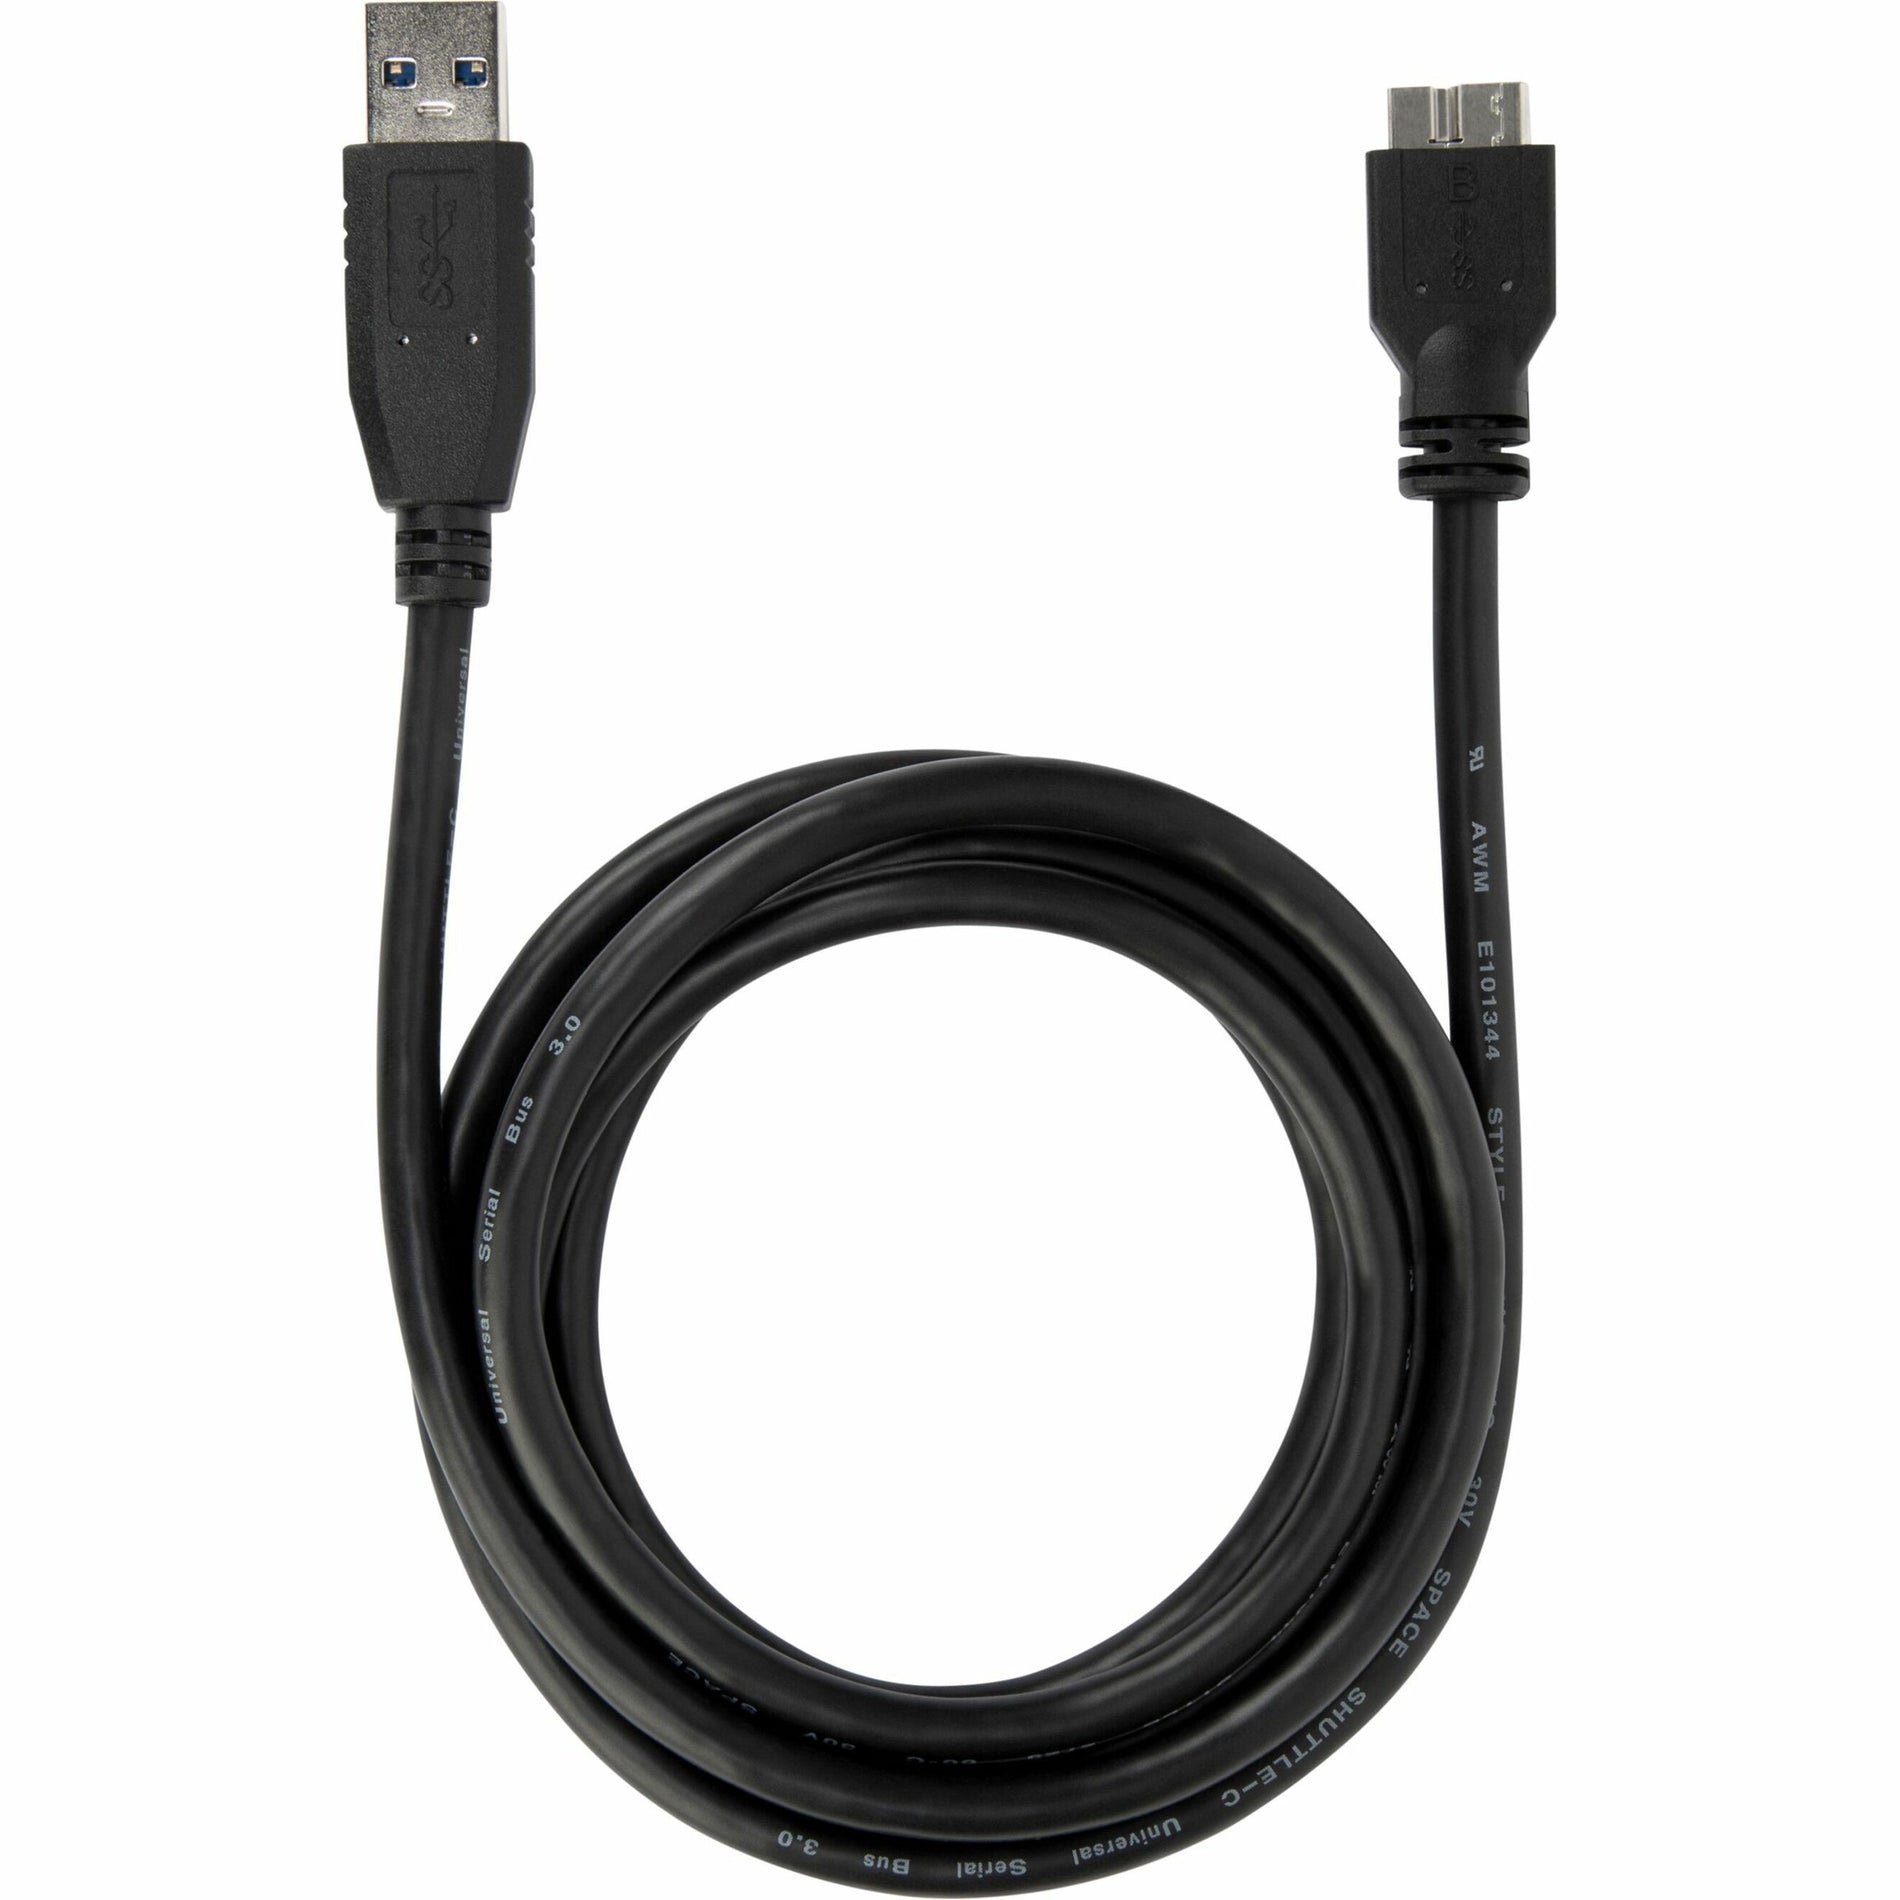 Targus ACC1005USZ 1.8M USB-A Male to Micro USB-B Male Cable, 5.91 ft Charging Data Transfer Cable